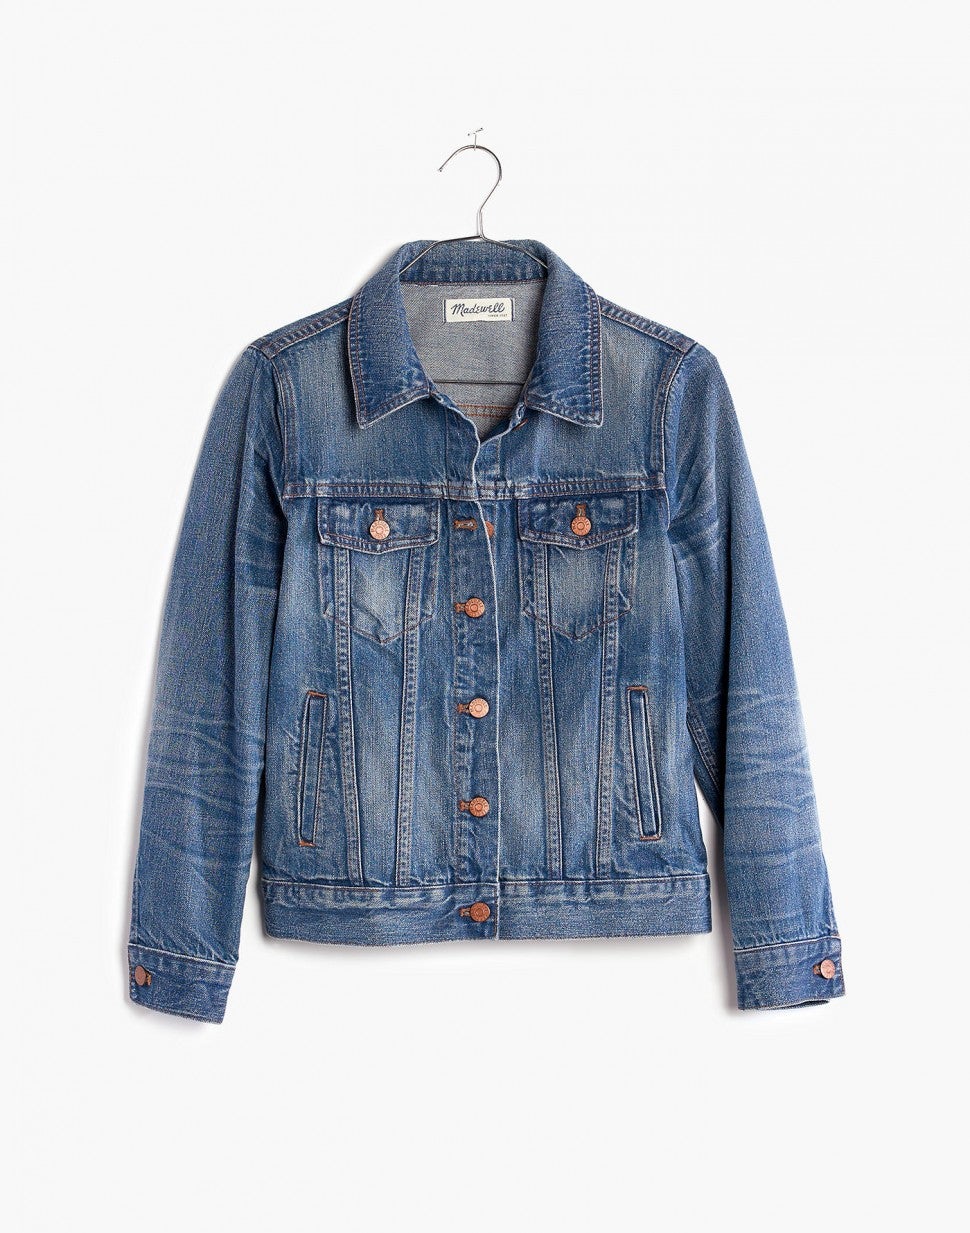 Madewell The Jean Jacket in Pinter Wash